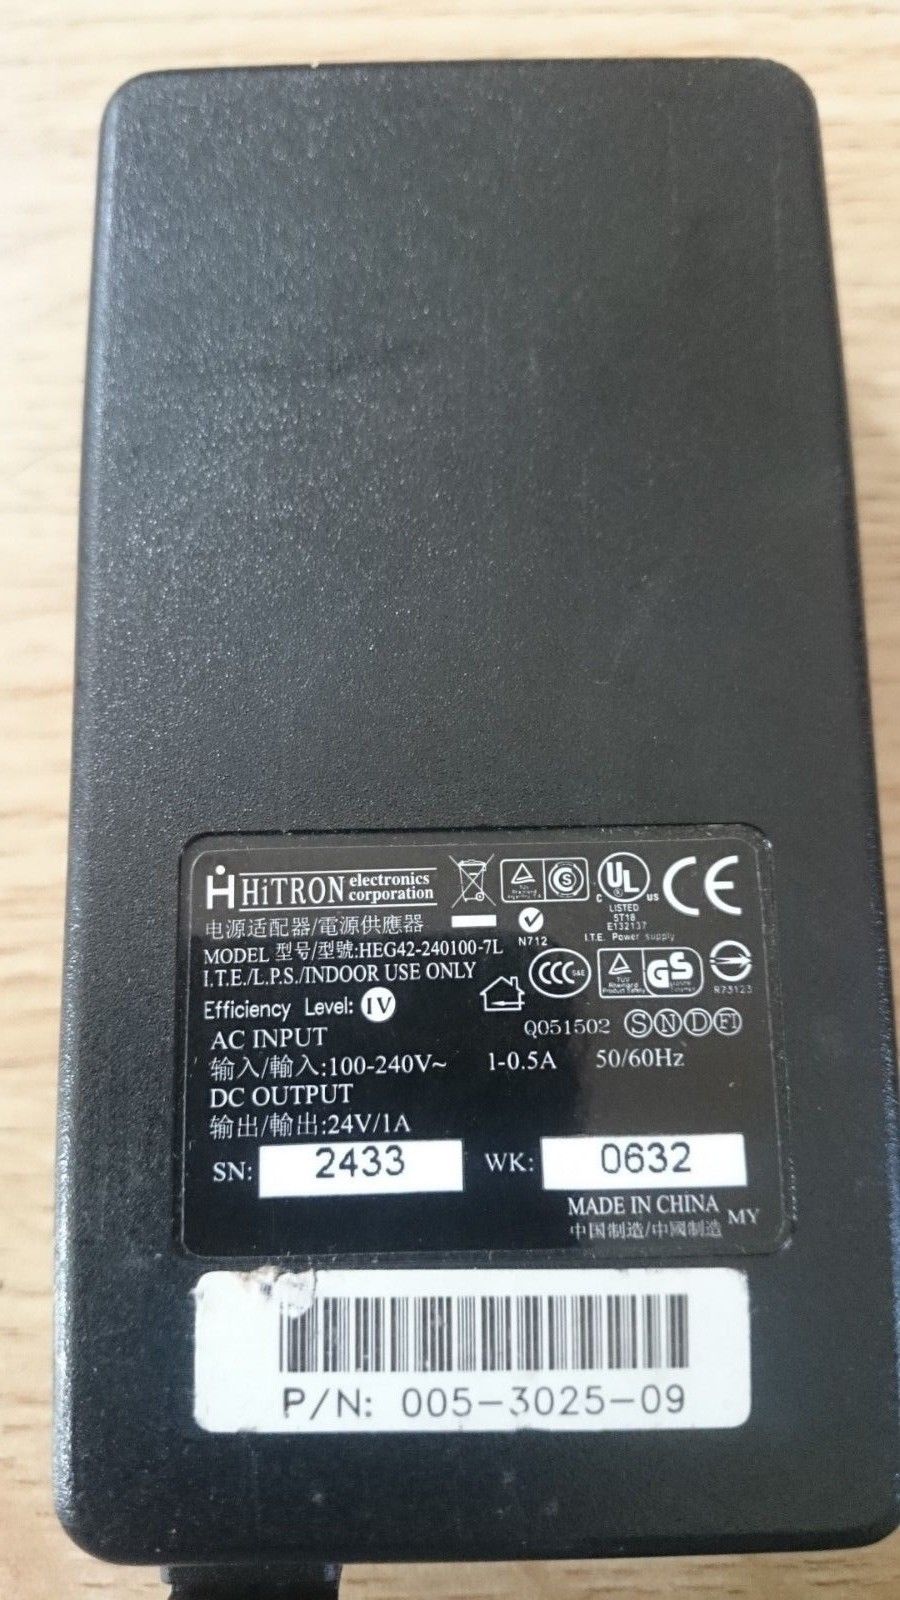 New Hitron 24V 1A HEG42-240100-7L Power Supply AC Adapter Charger - Click Image to Close